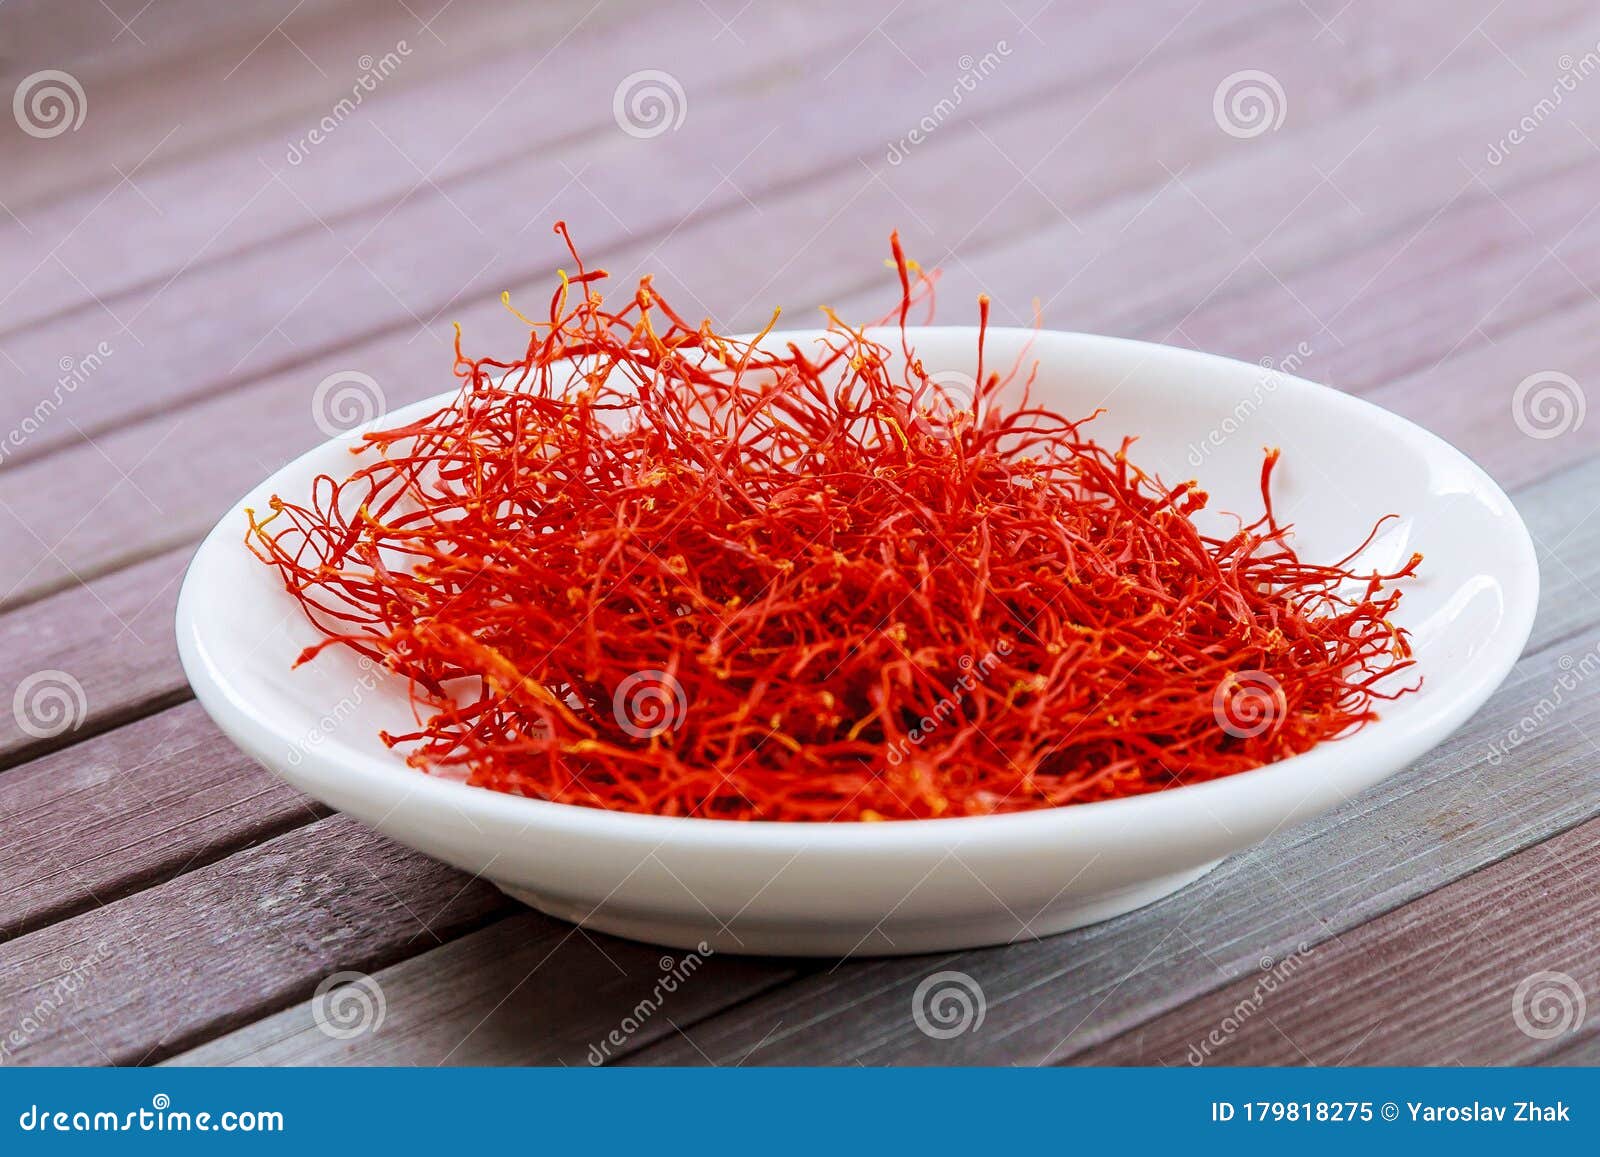 dry saffron spice on a white plate on wooden background